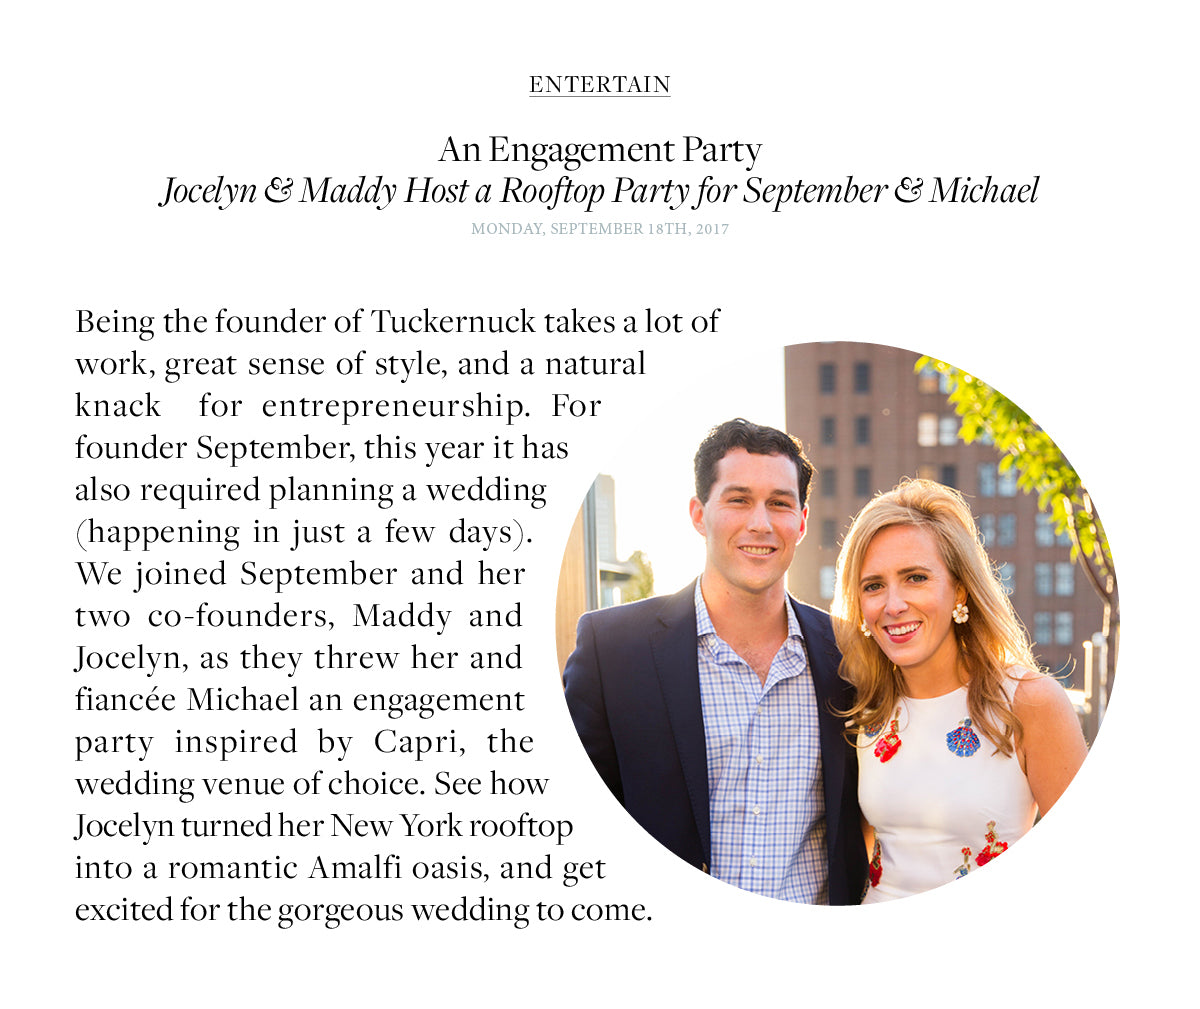 Being the founder of Tuckernuck takes a lot of work, great sense of style, and a natural knack  for entrepreneurship. For founder September, this year it has also required planning a wedding (happening in just a few days). We joined September and her two co-founders, Maddy and Jocelyn, as they threw her and fiancée Michael an engagement party inspired by Capri, the wedding venue of choice. See how  Jocelyn turned her New York rooftop into a romantic Amalfi oasis, and get excited for the gorgeous wedding to come.